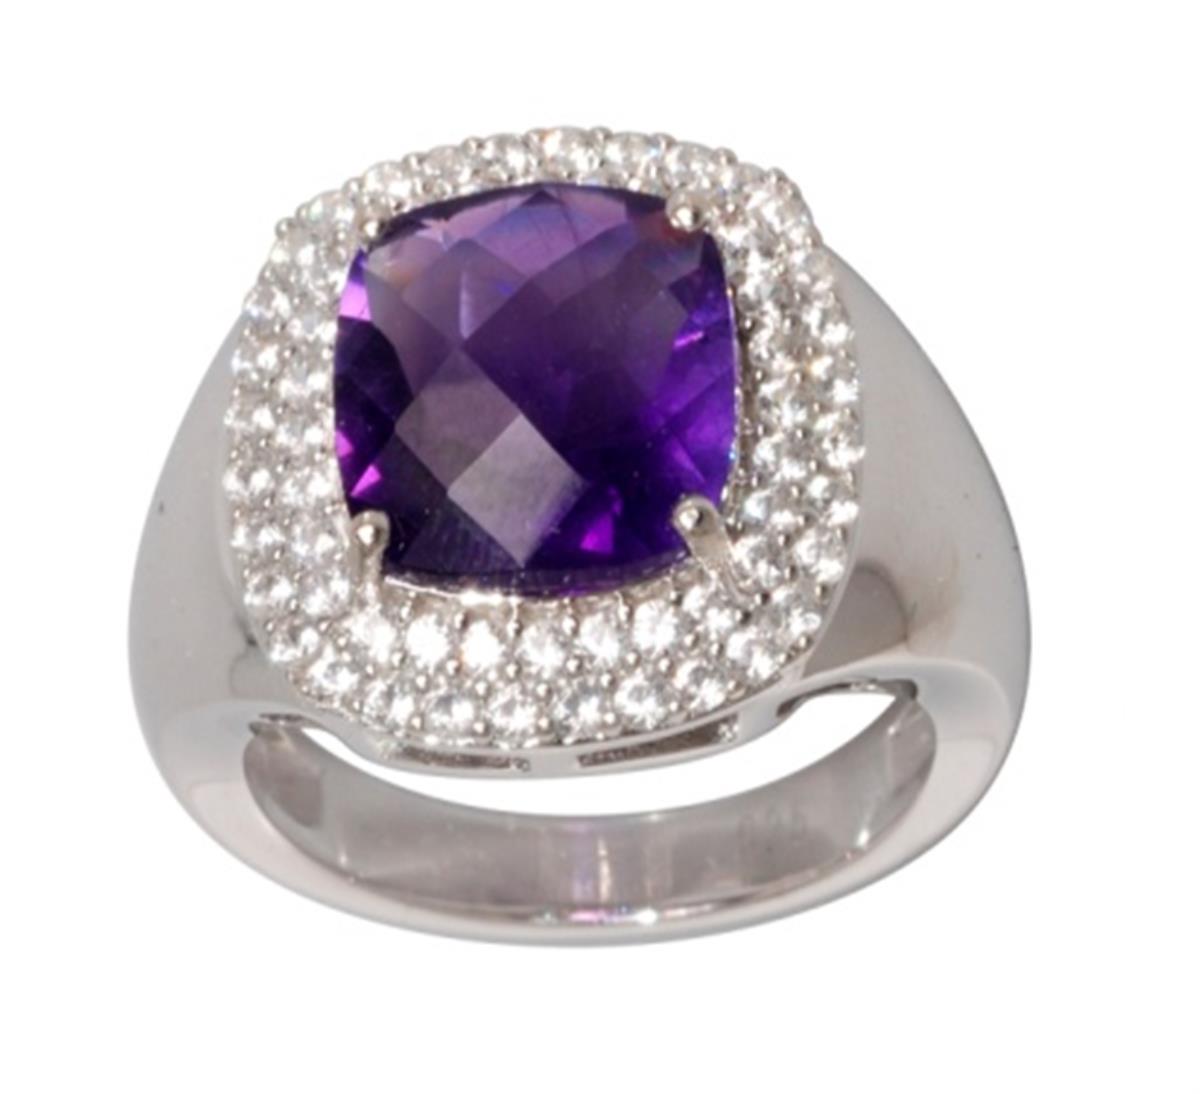 10K White Gold 10mm Cushion Cut Amethyst with White Zircon Double Halo Fashion Ring